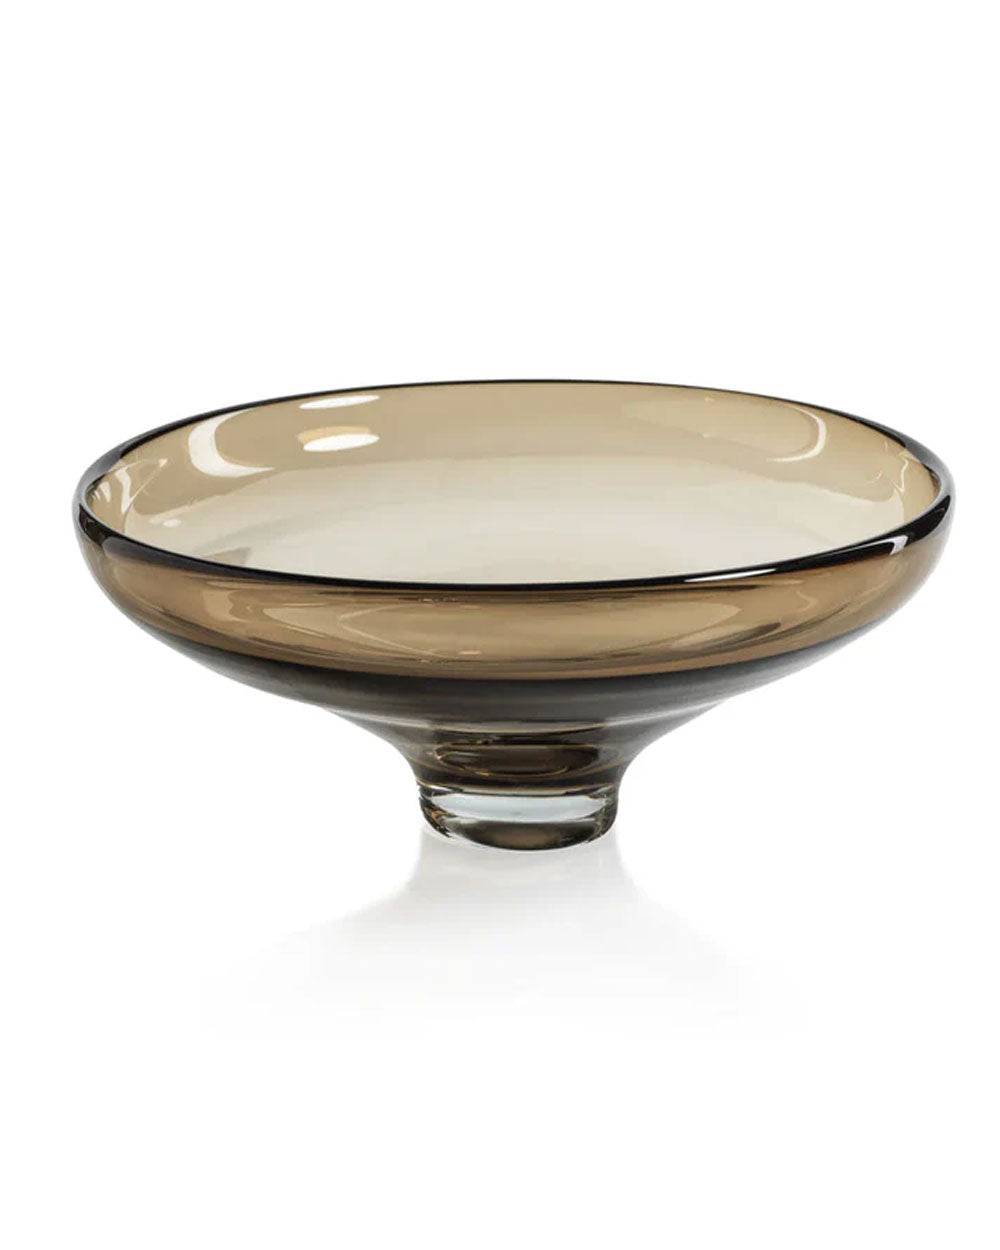 Cambria Glass Bowl in Taupe